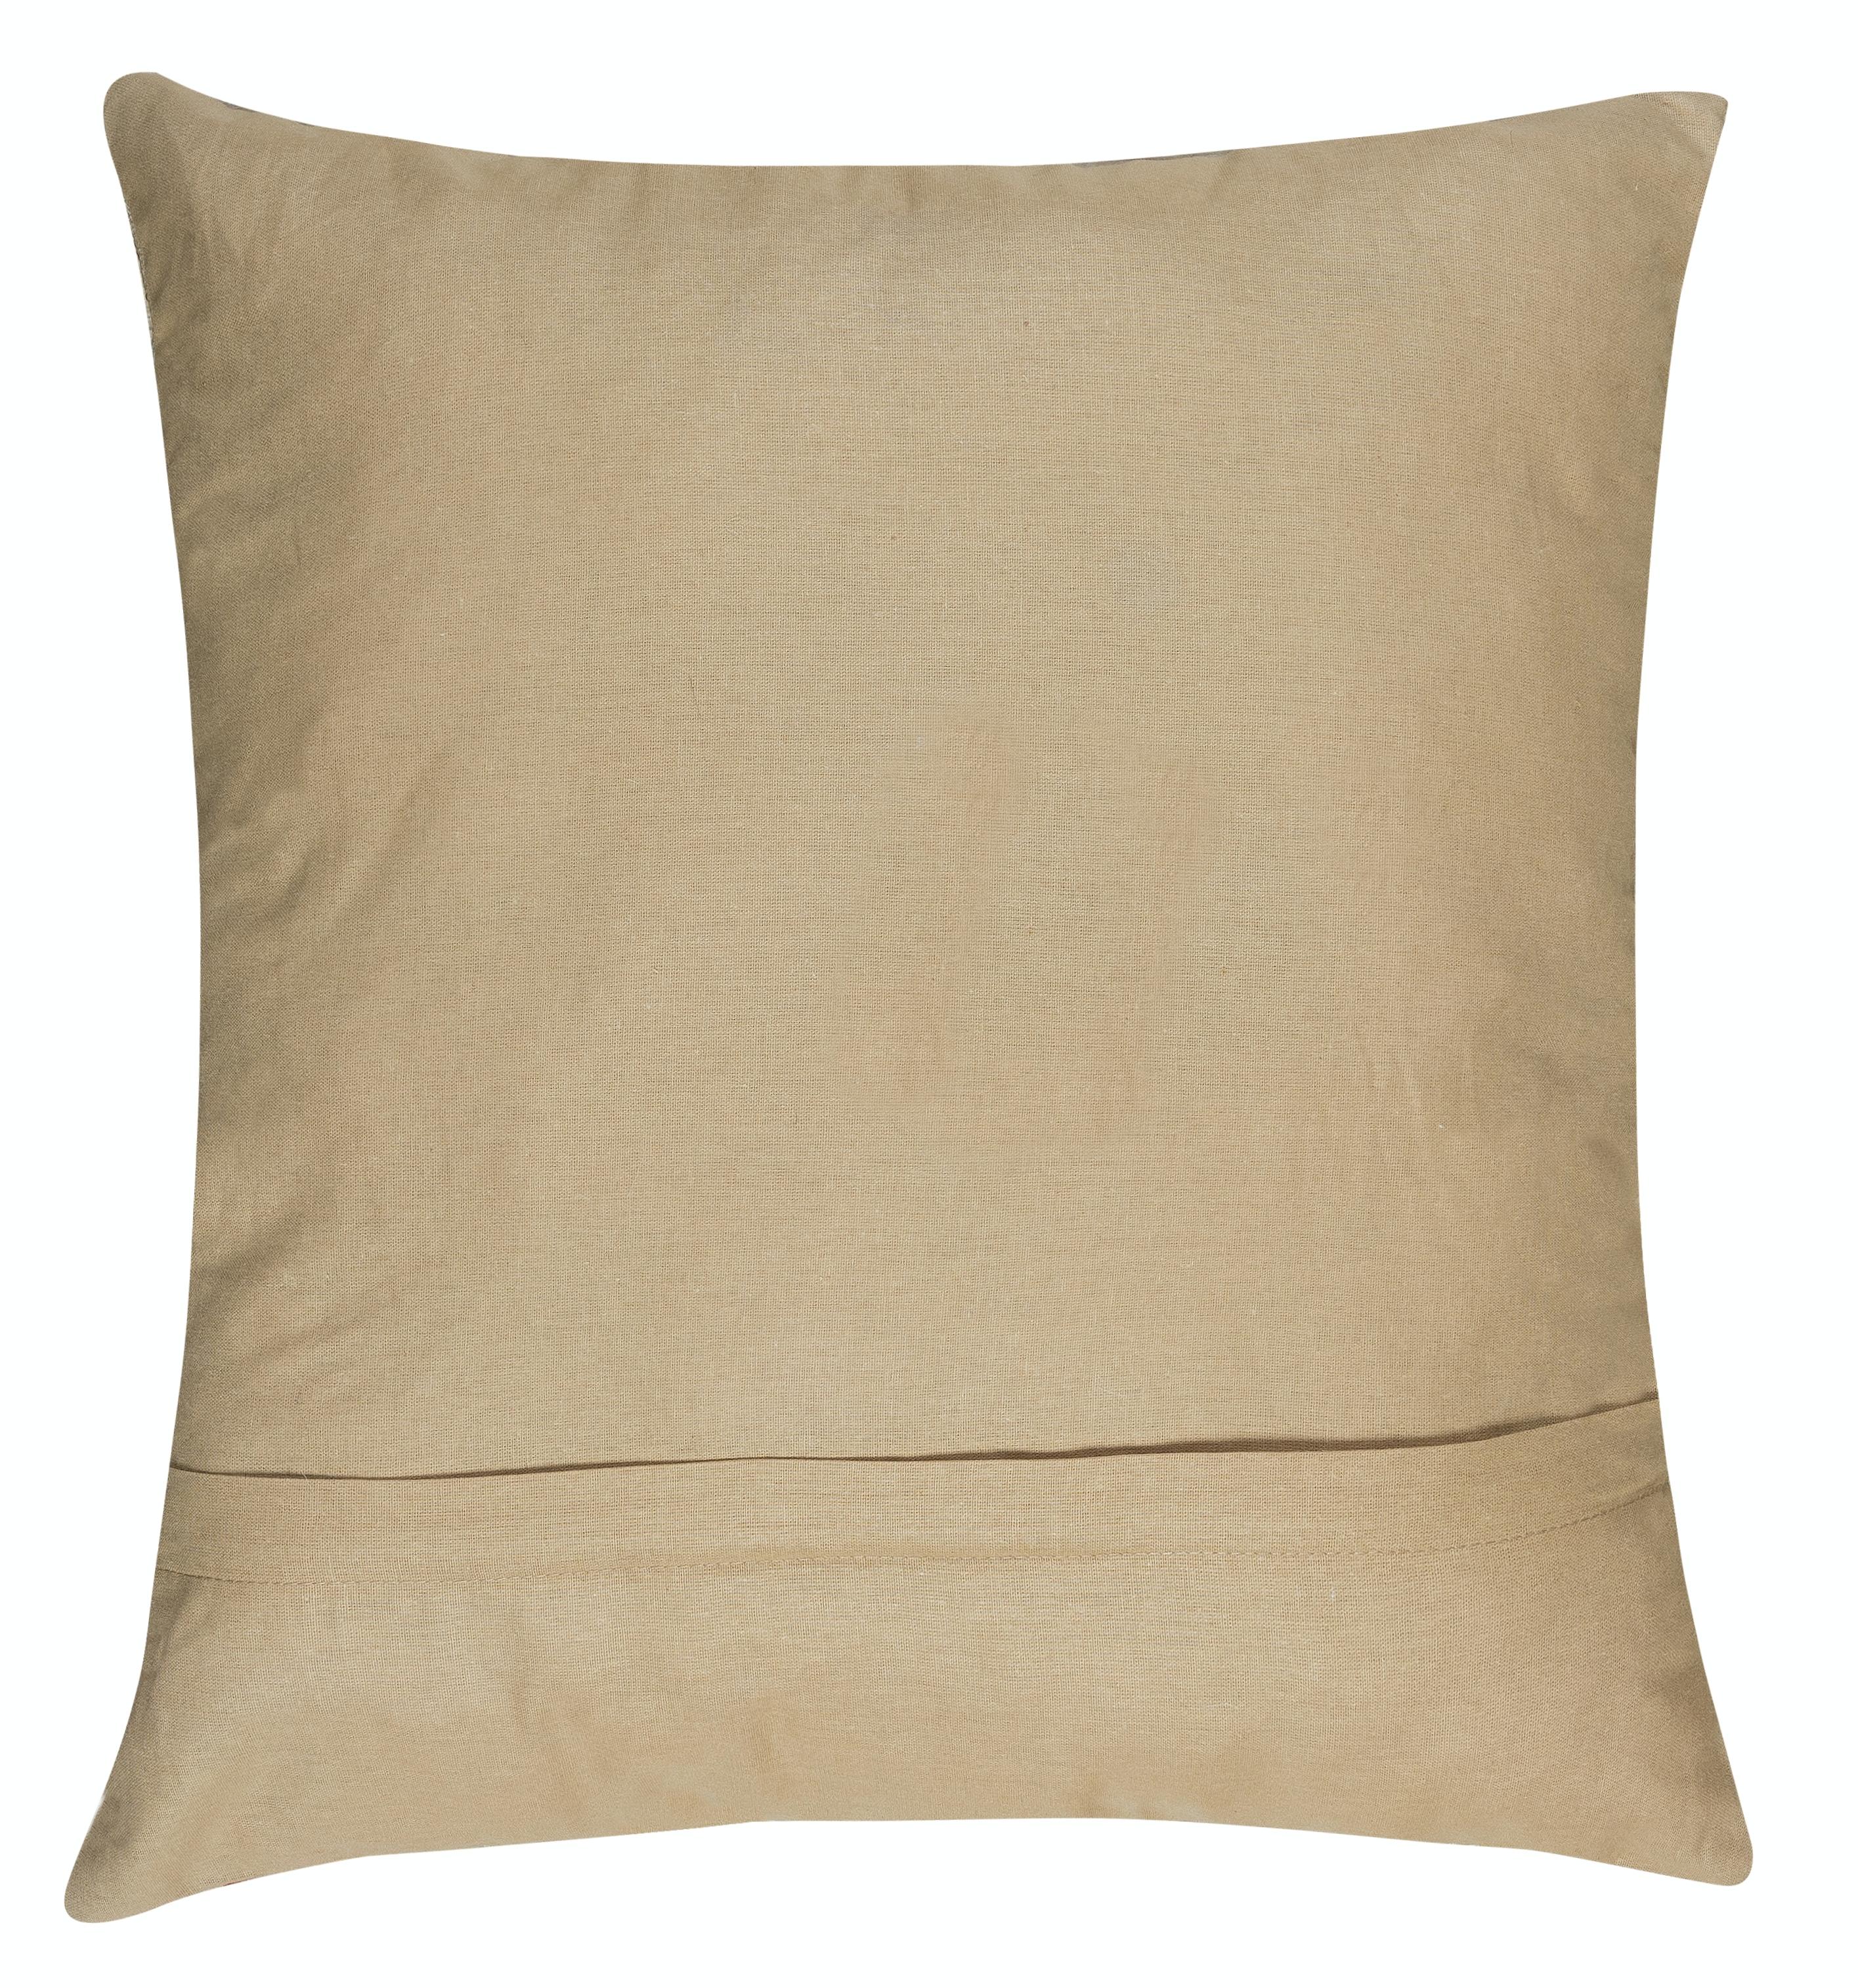 Embroidered Suzani Throw Pillow, All Silk Cushion Cover, Hand Embroidery Toss Pillow For Sale